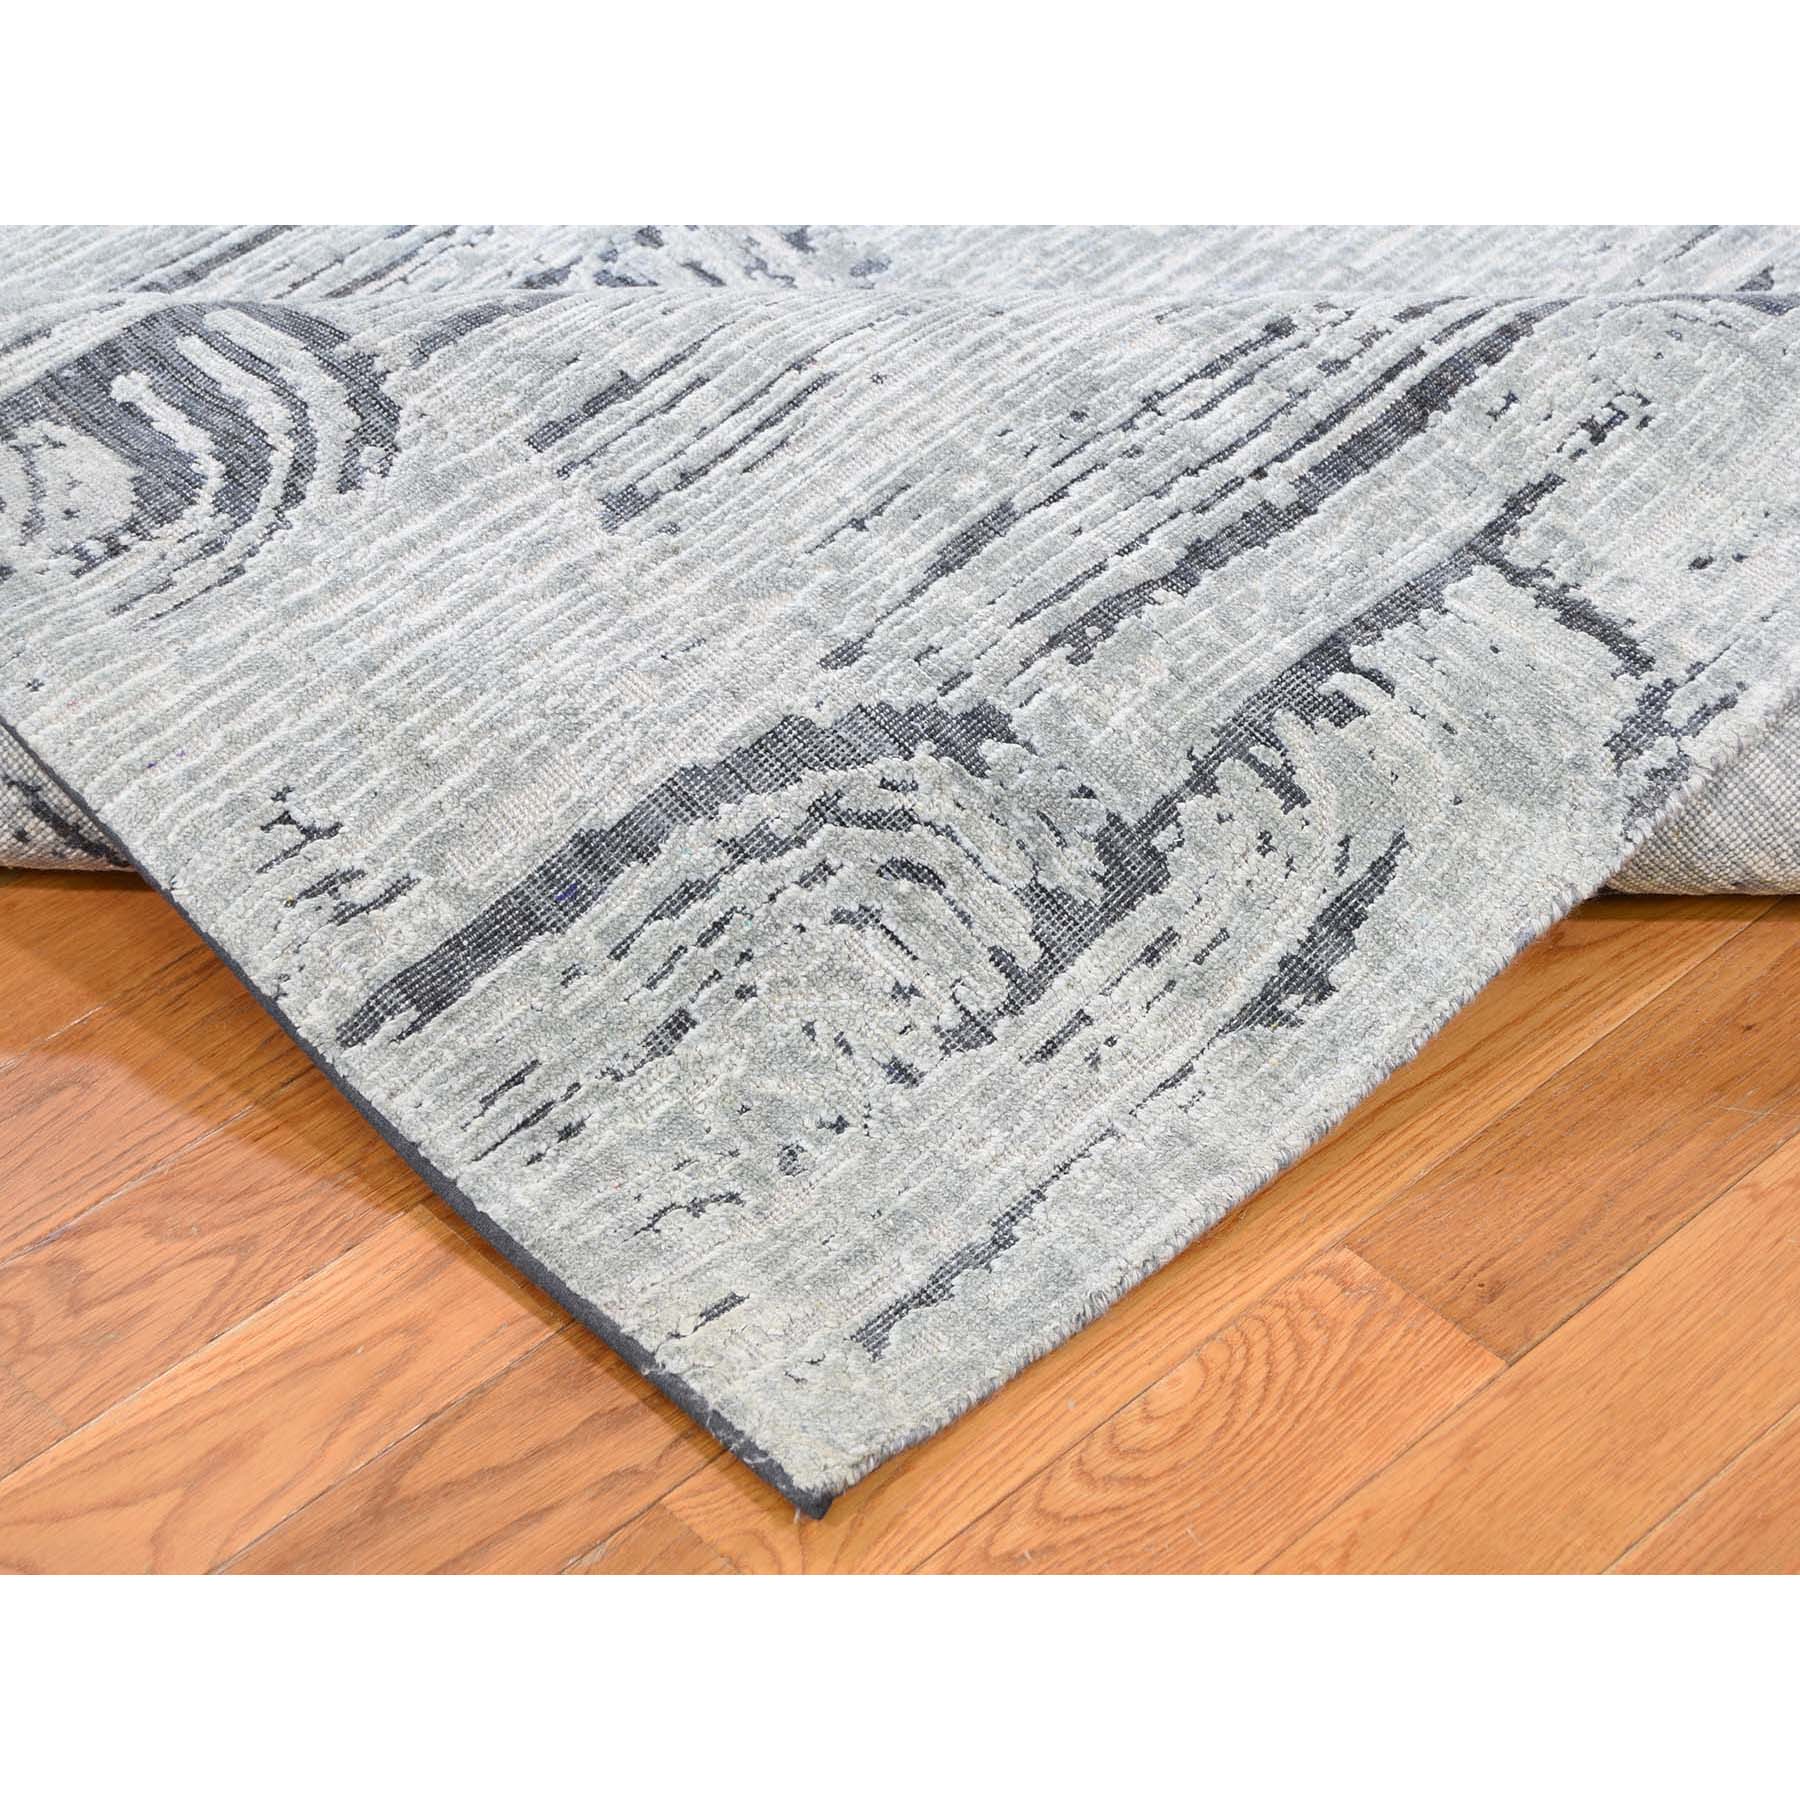 8-9 x12-2  THE CANE, Pure Silk With Textured Wool  Hand-Knotted Oriental Rug 